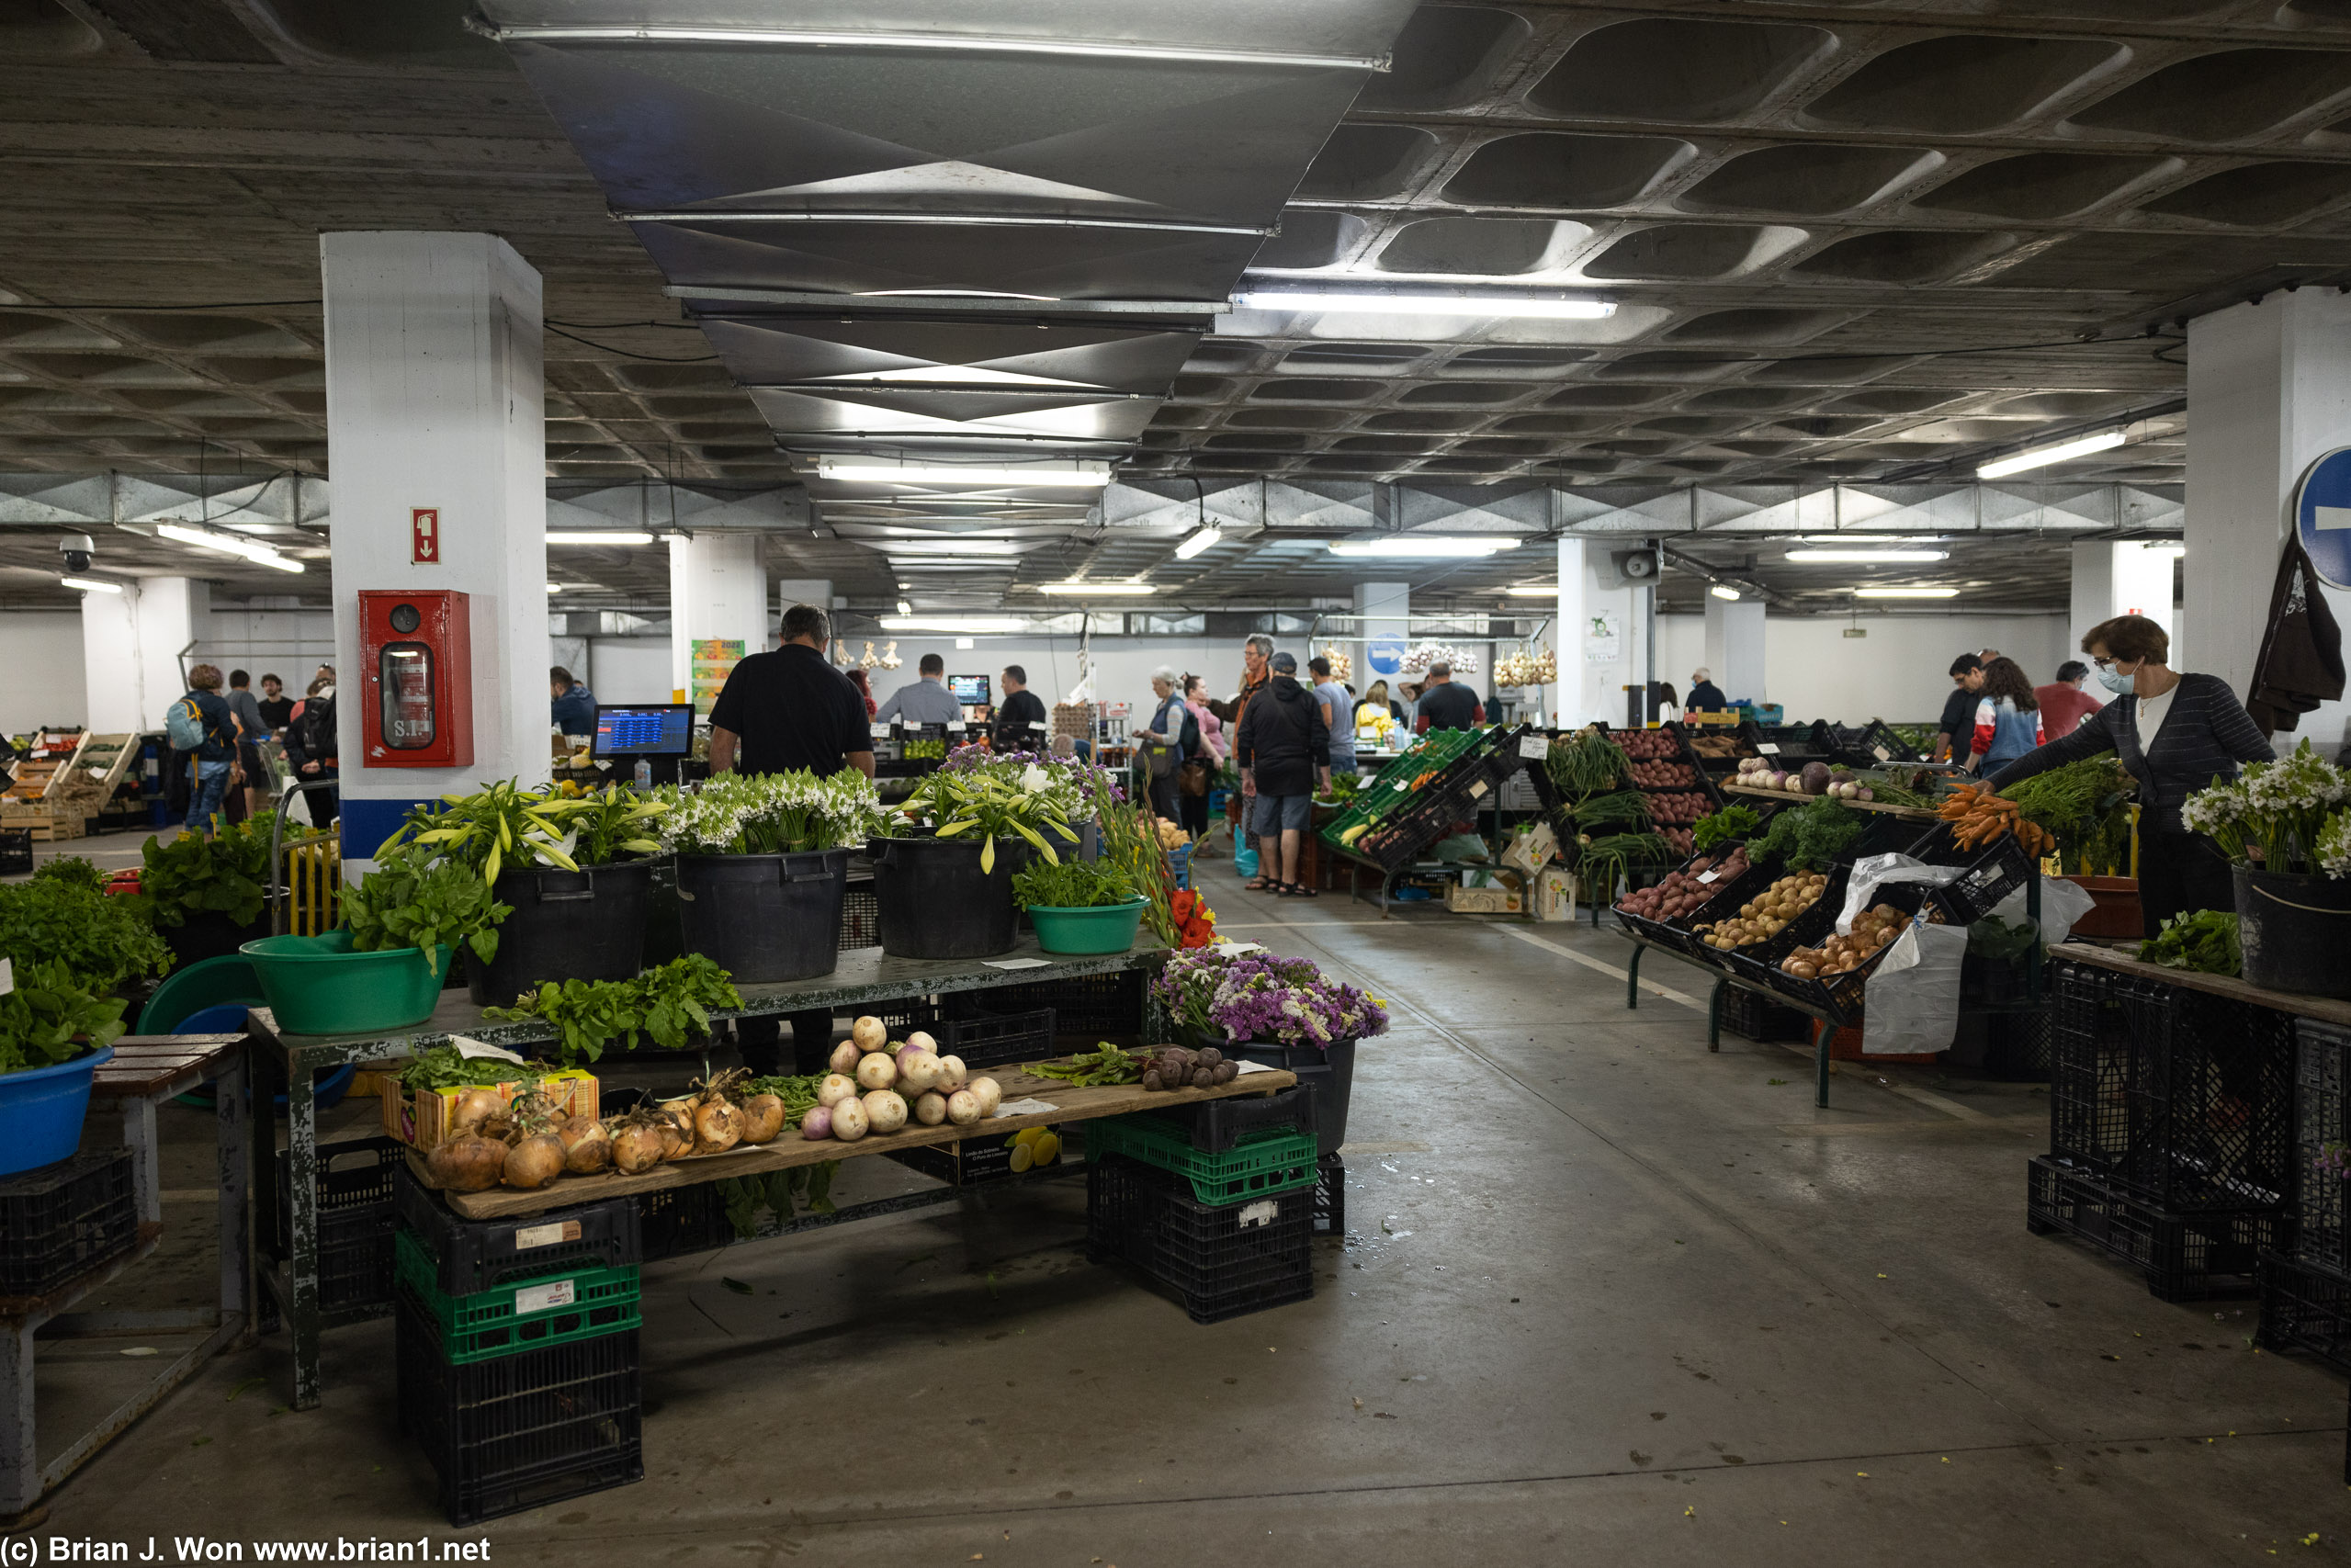 Did not expect a farmers' market to be in a parking garage.